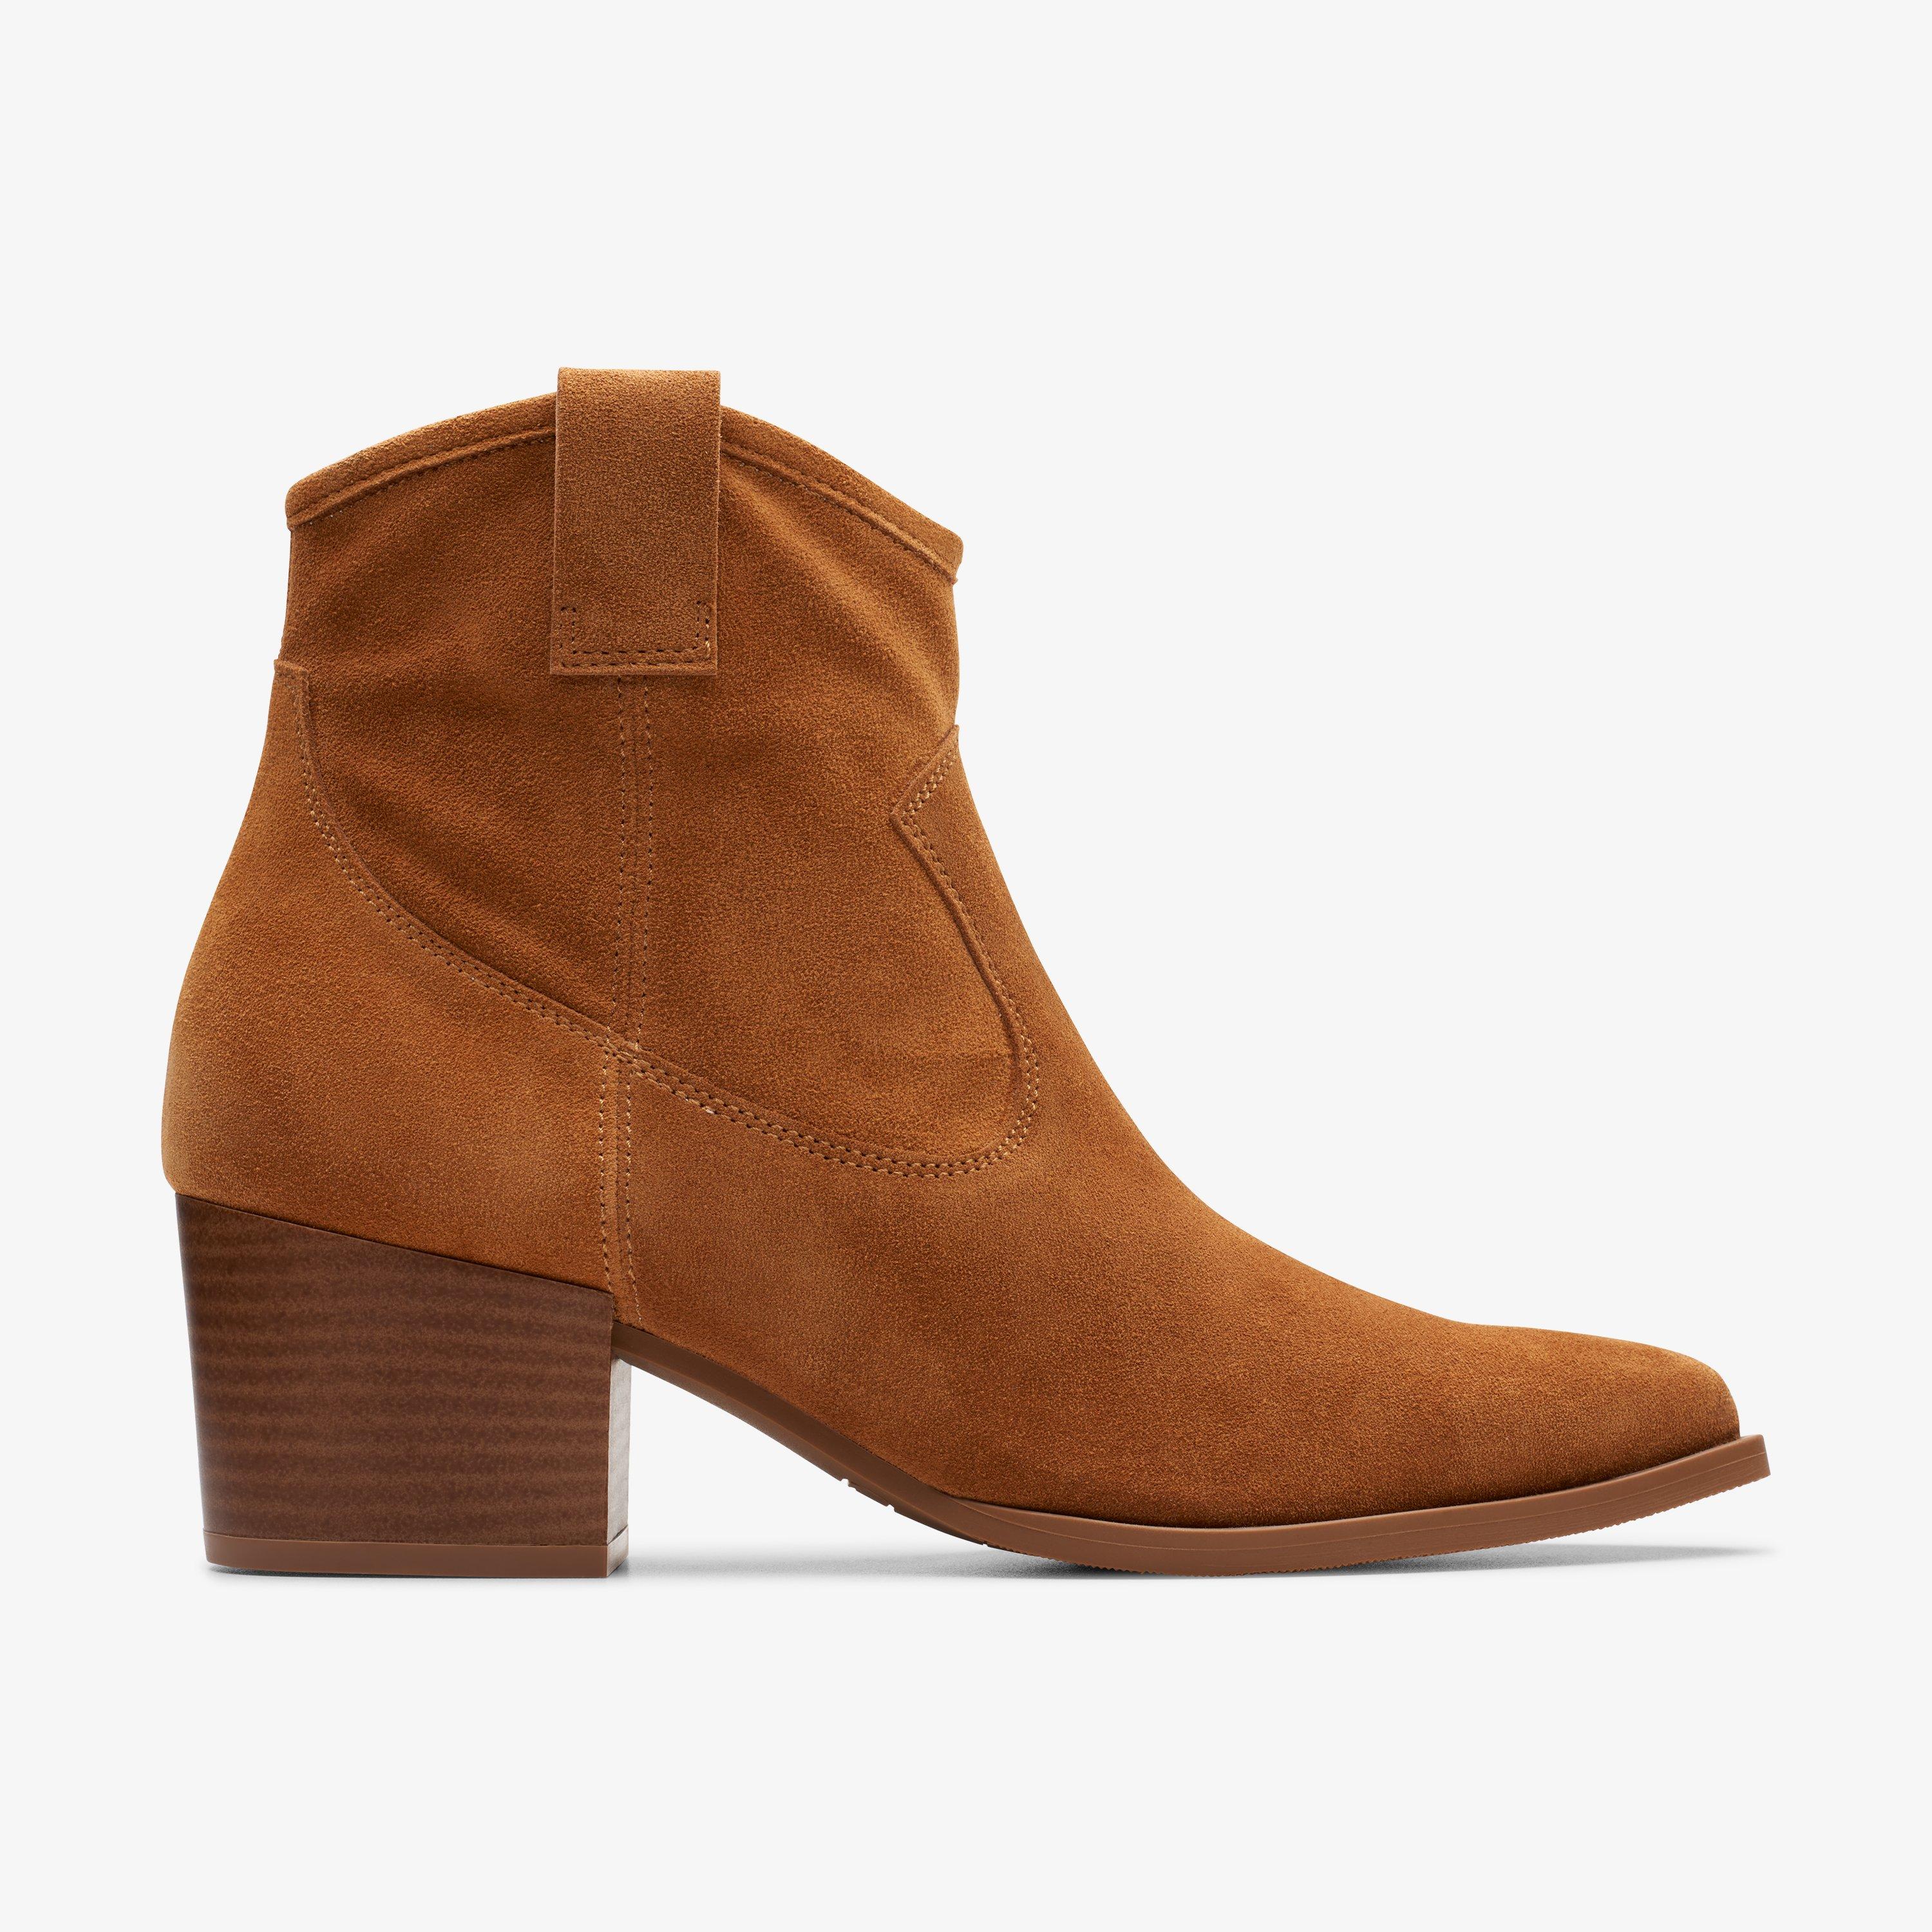 Brown suede booties + FREE SHIPPING